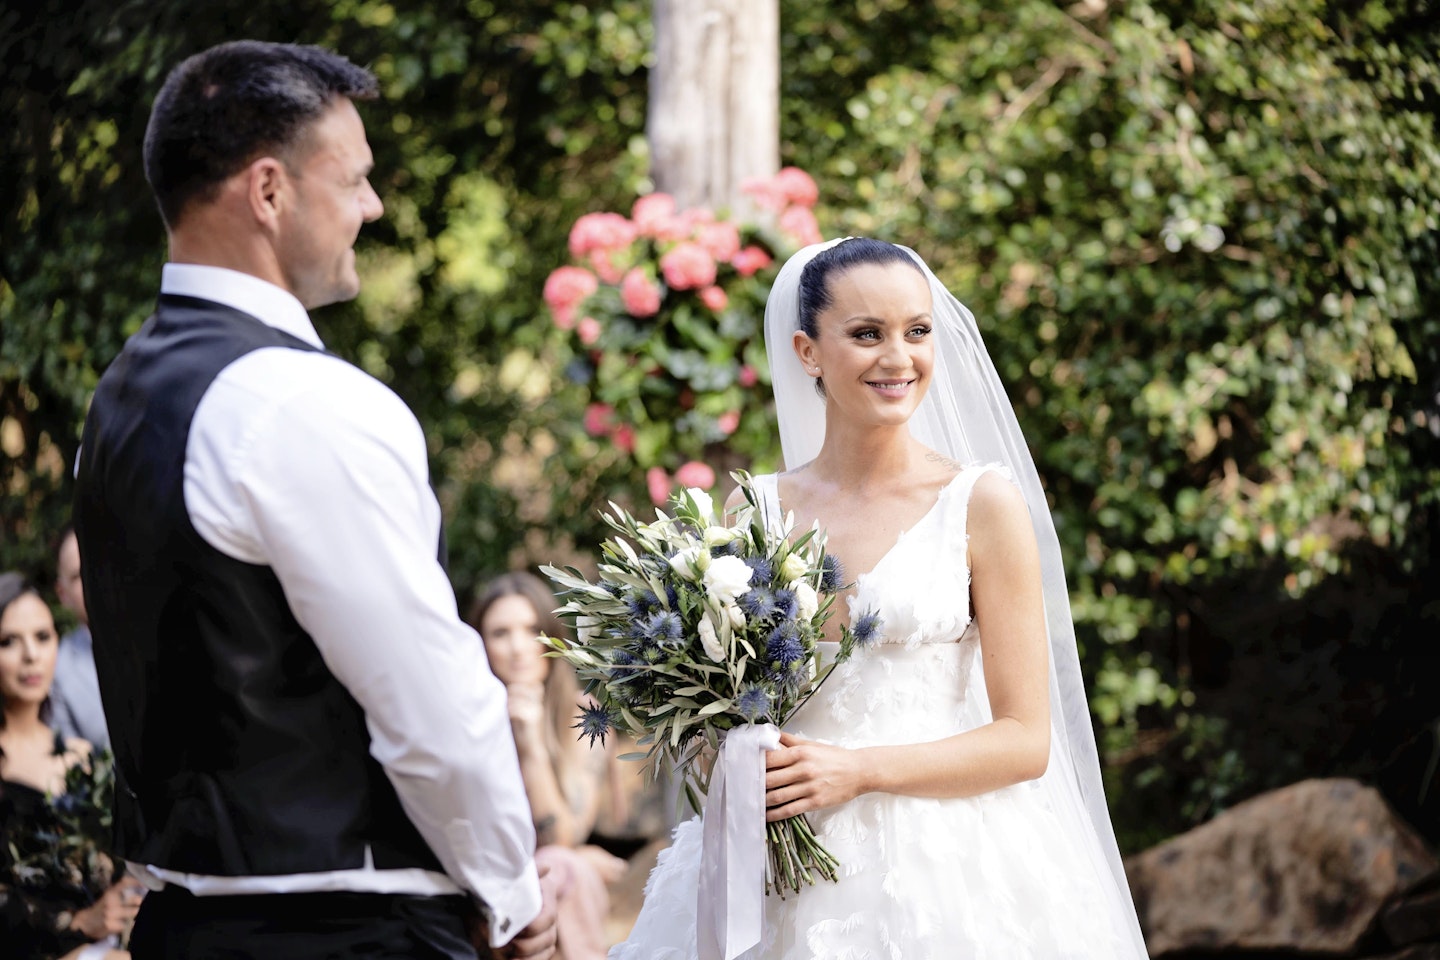 married at first sight ines basic